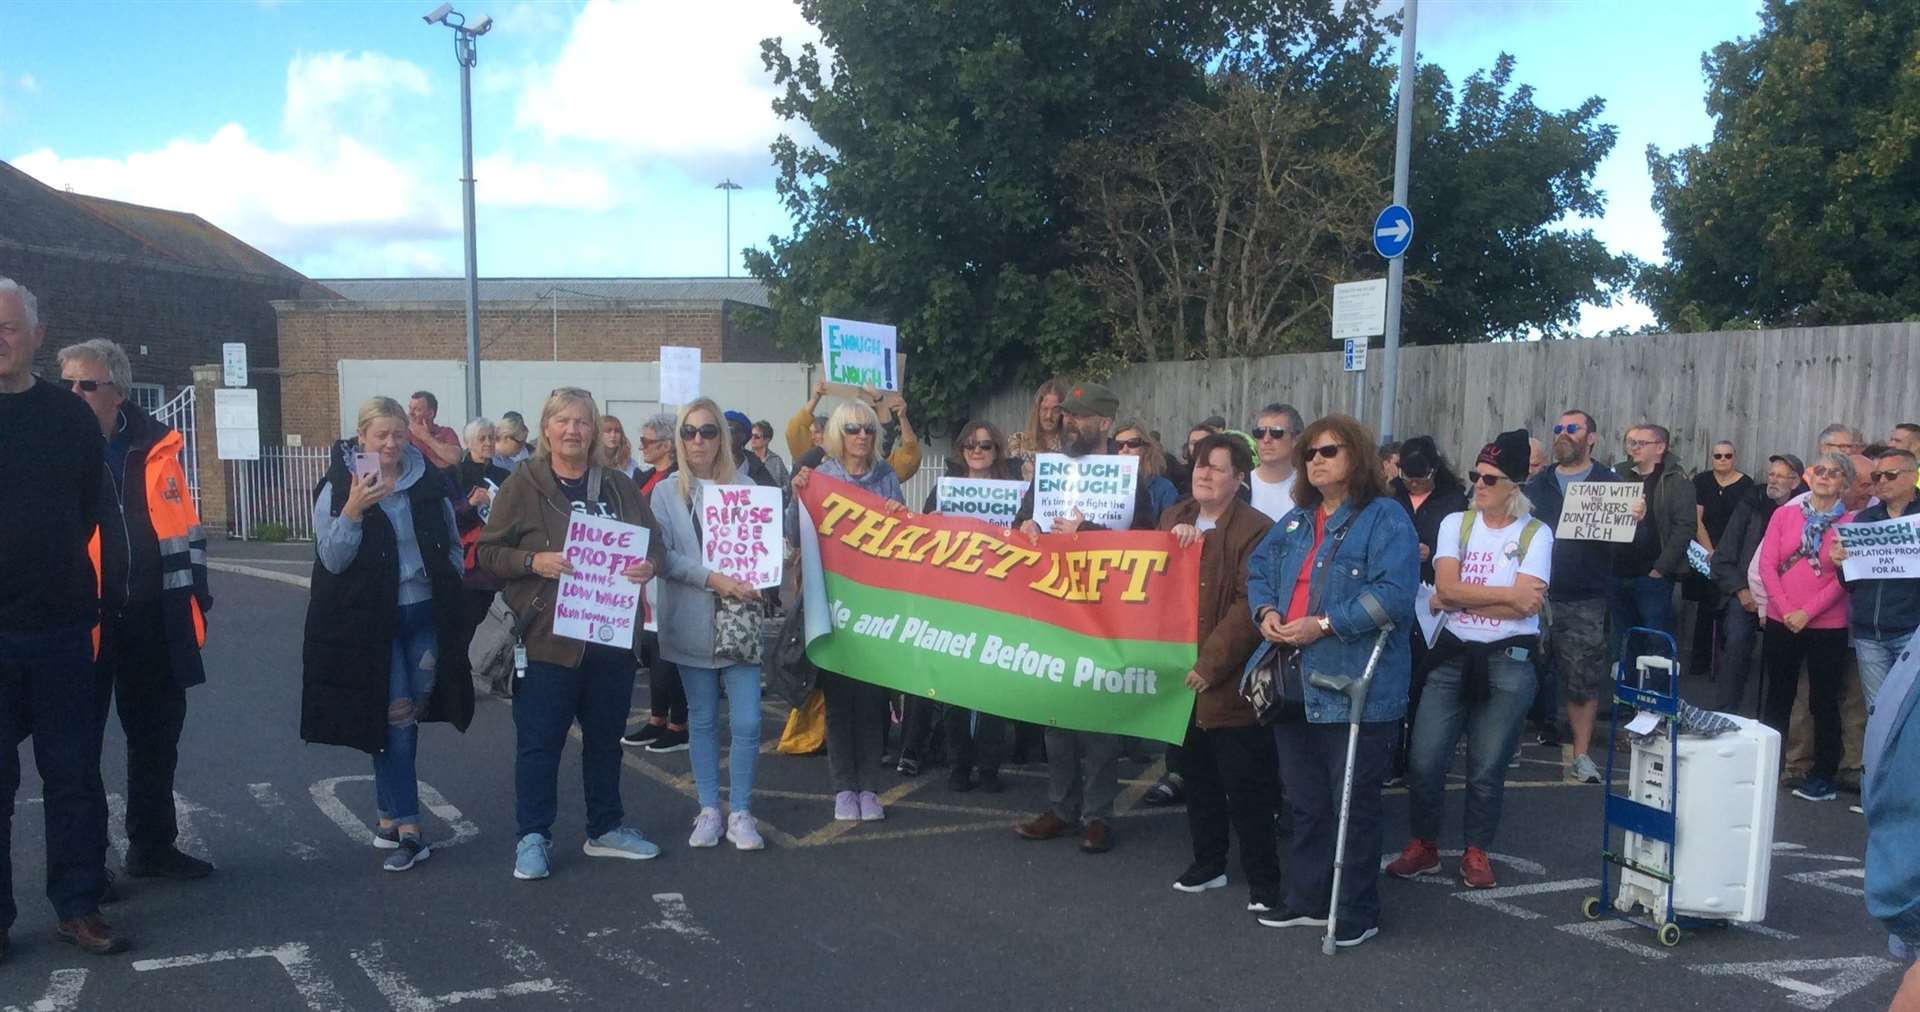 The 'Enough is Enough' protest in Ramsgate